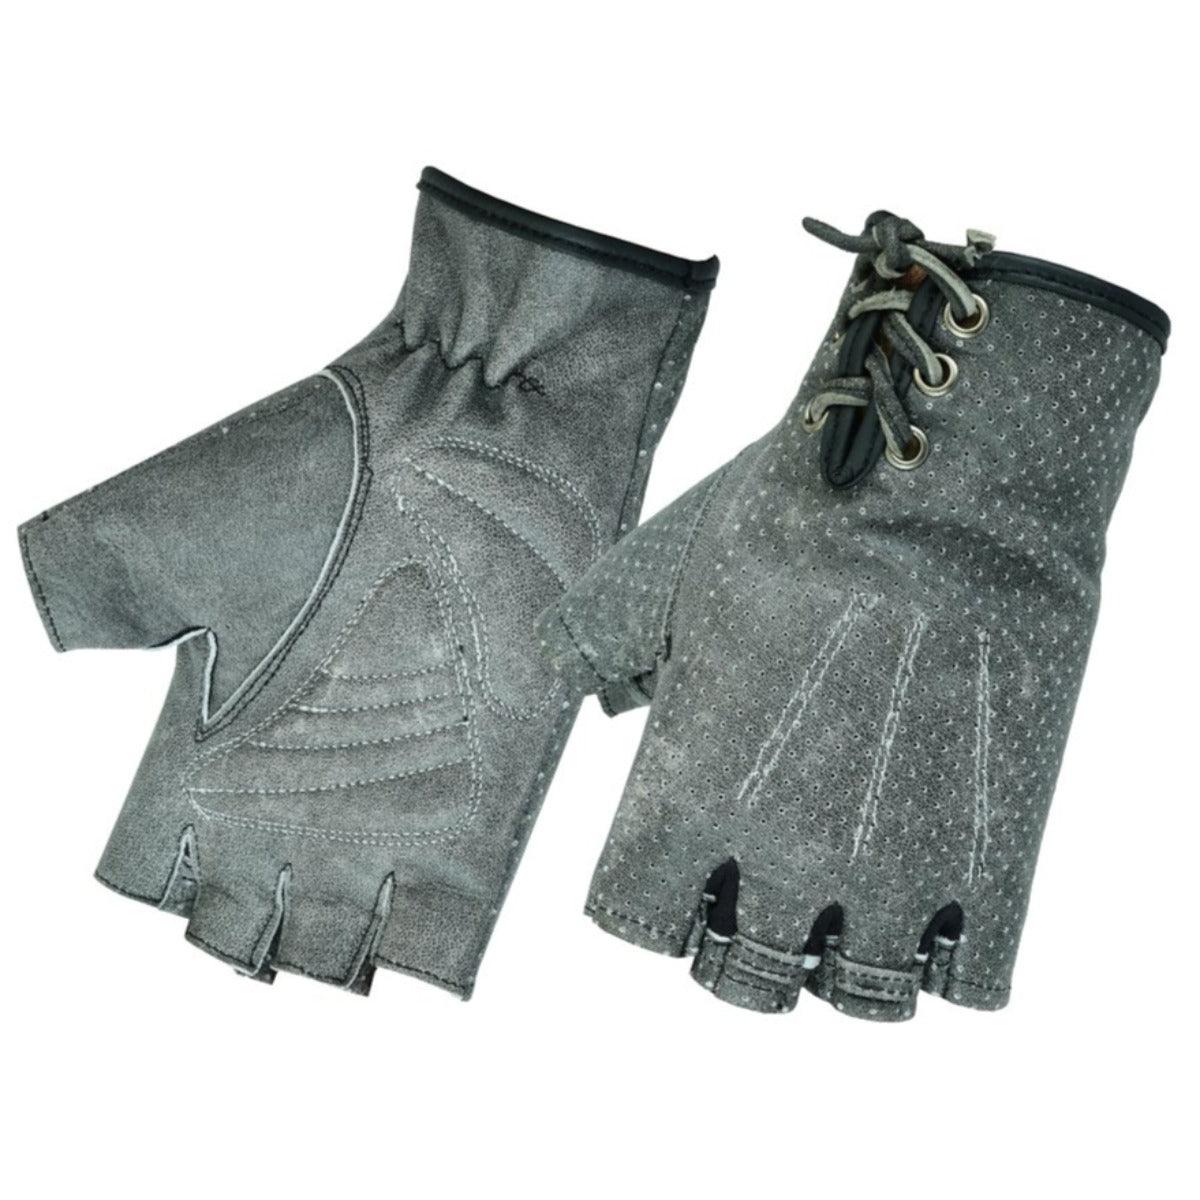 Daniel Smart Women’s Perforated Fingerless Gloves, Washed-Out Gray - American Legend Rider